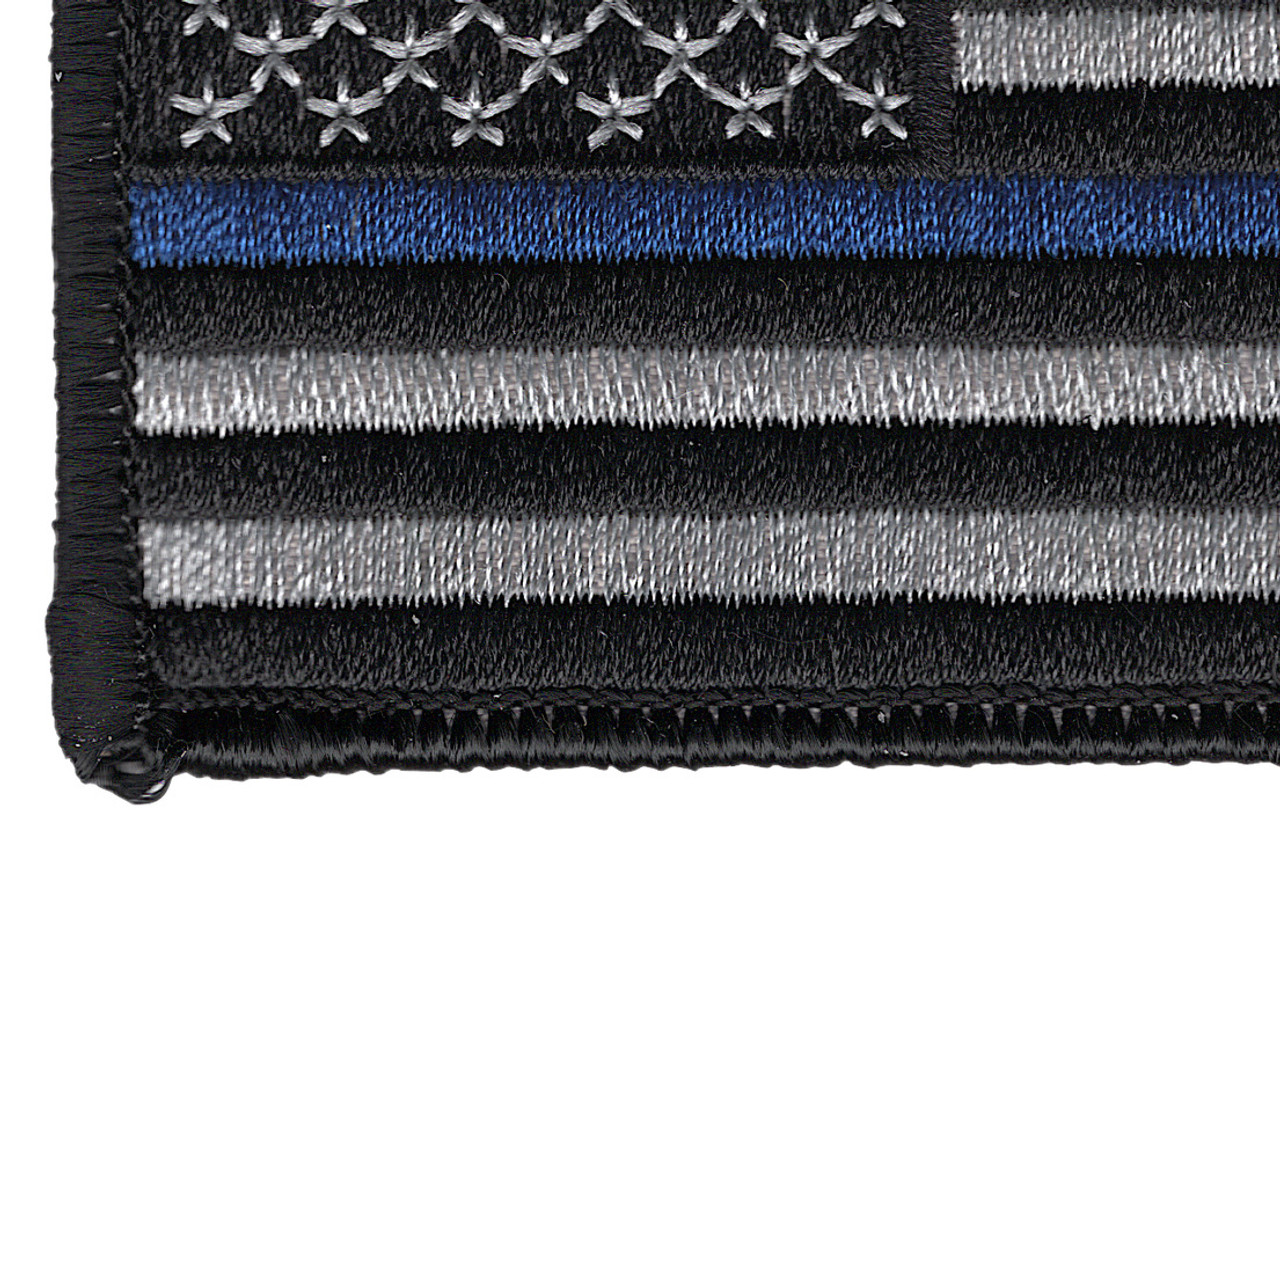 Thin Blue Line American Flag Patch, Black Border, 2 x 3 Inches, Sew on